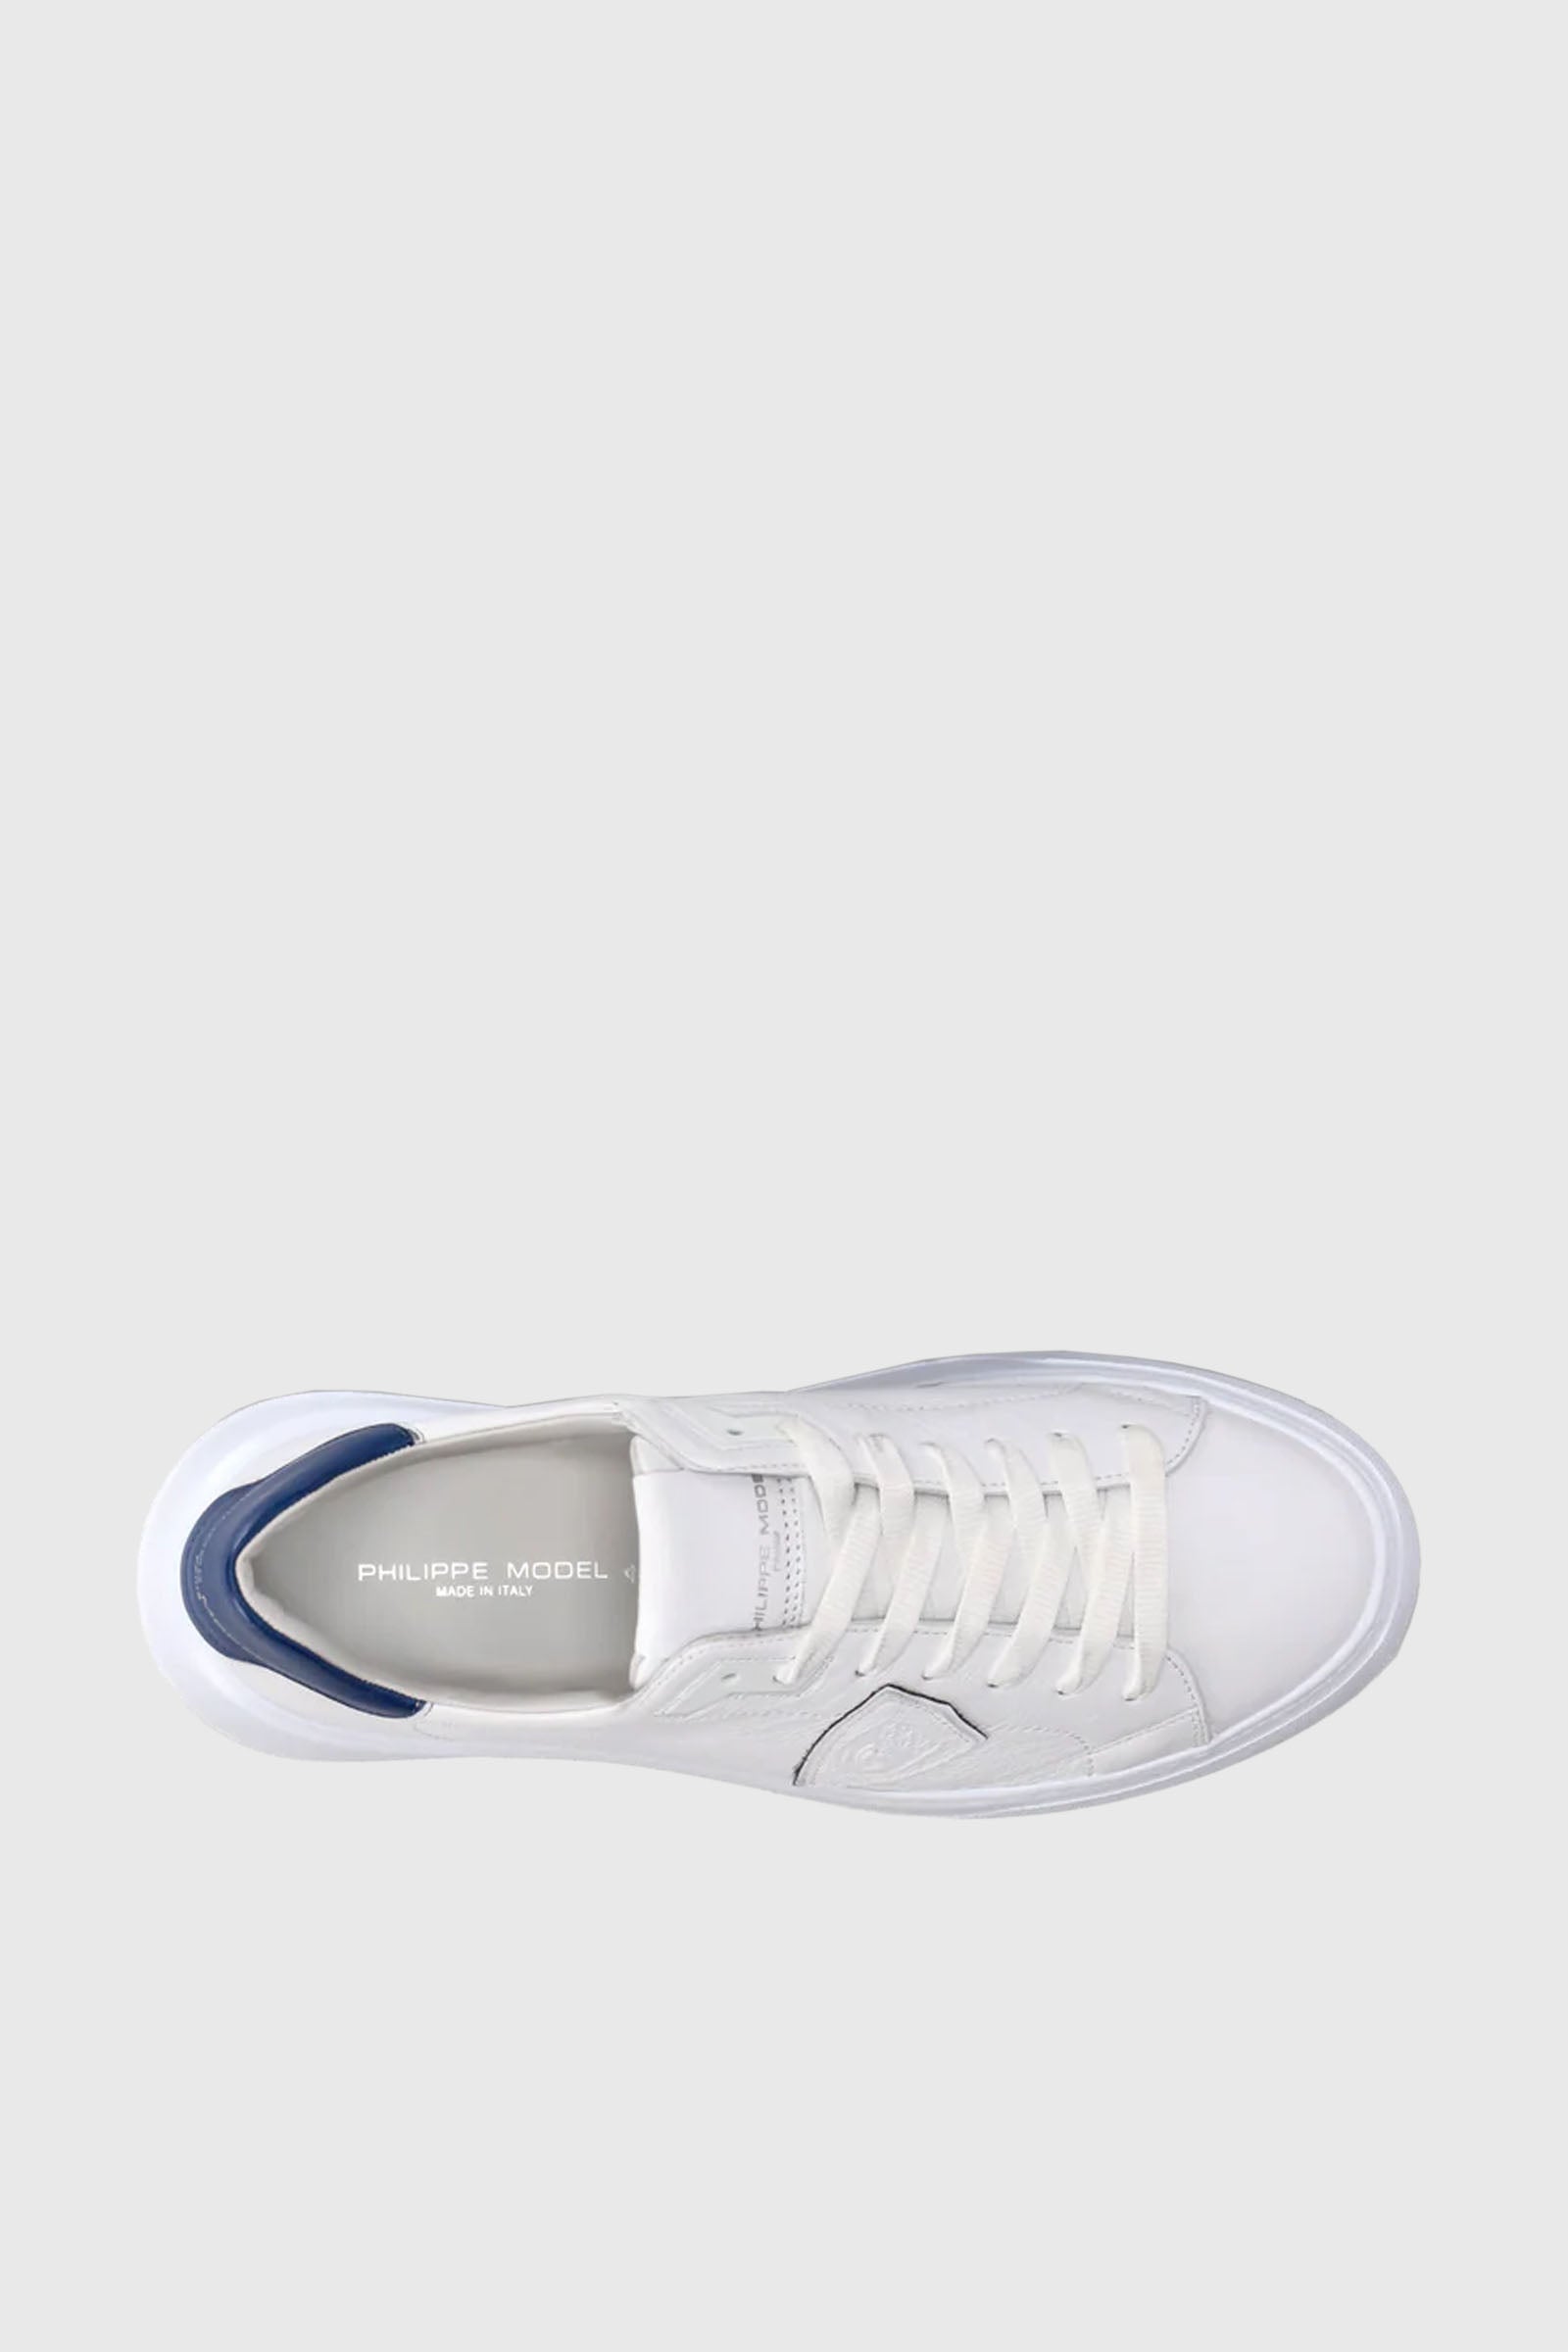 Philippe Model Sneaker Temple West Leather White/Blue - 5